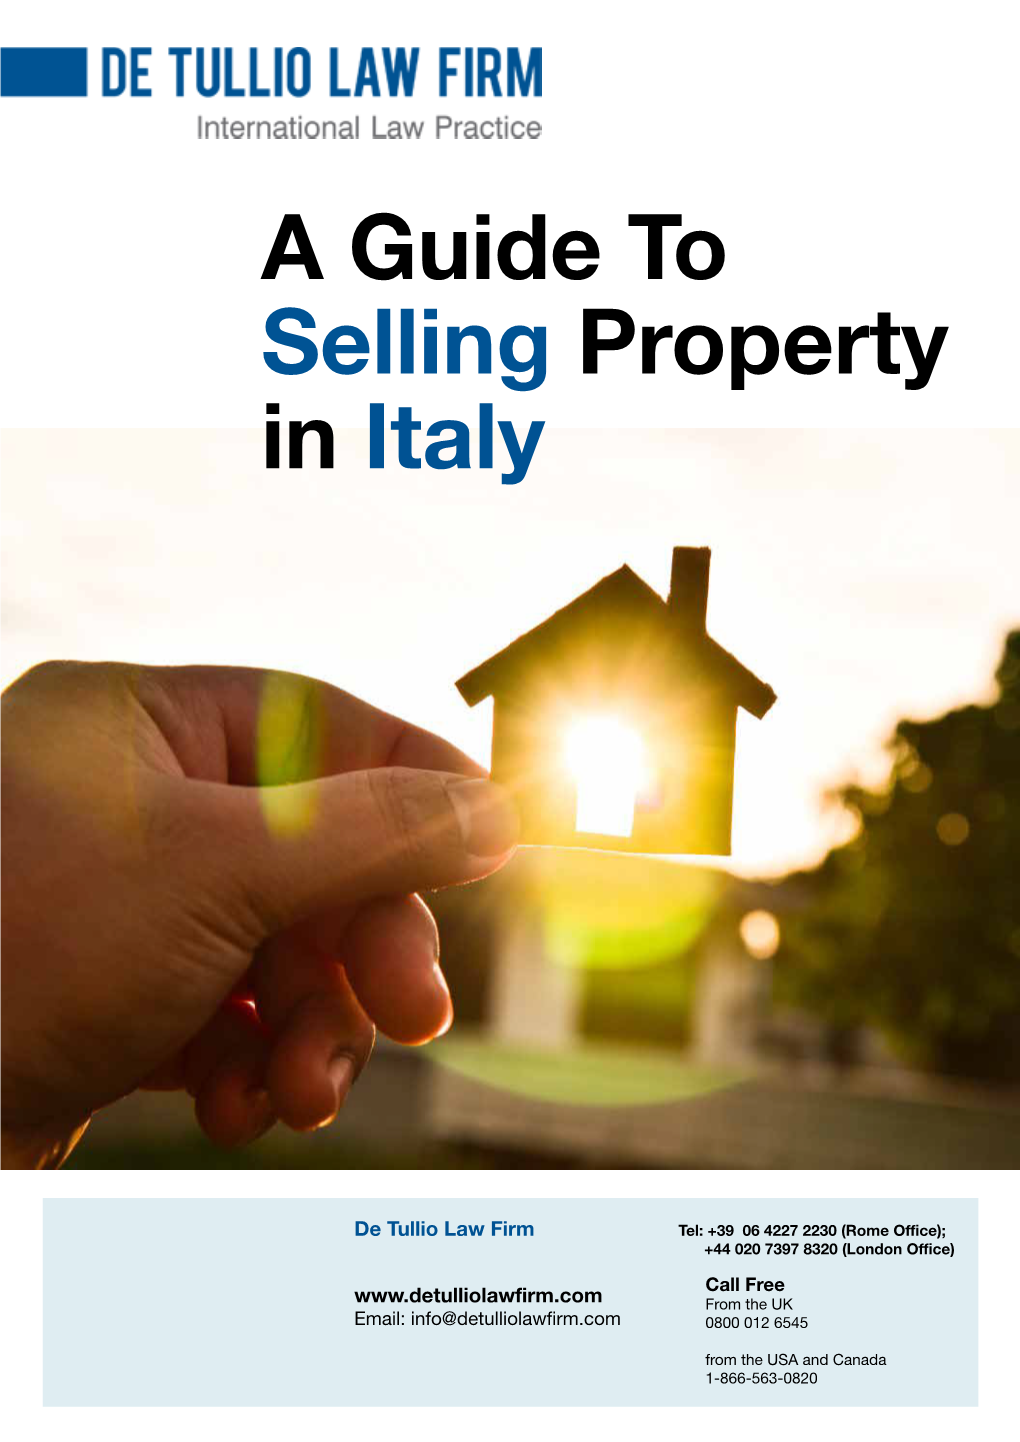 A Guide to Selling Property in Italy